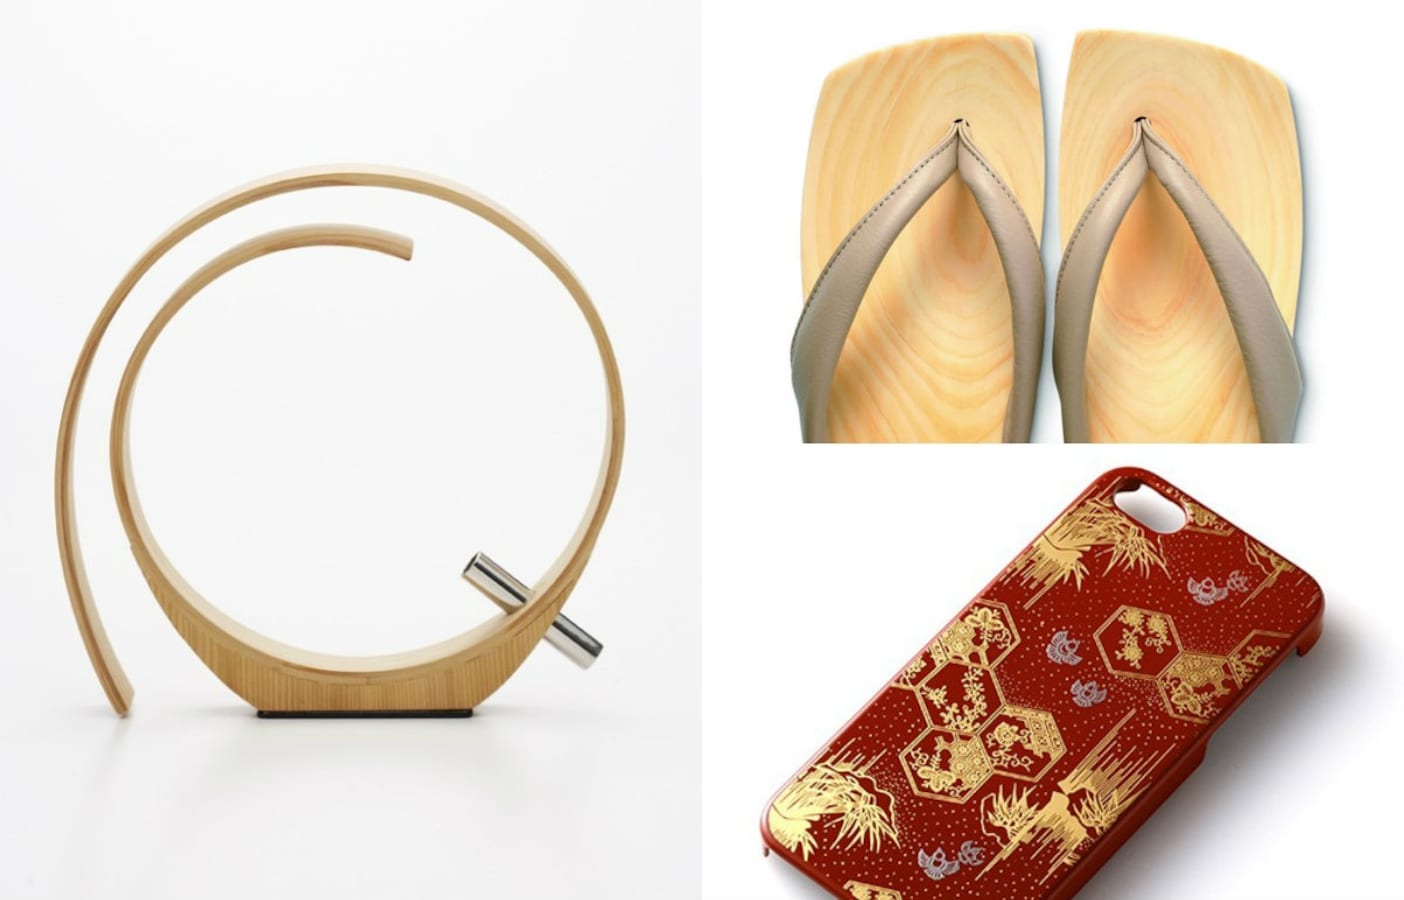 7 Cool Traditional Japanese-Style Gifts | All About Japan